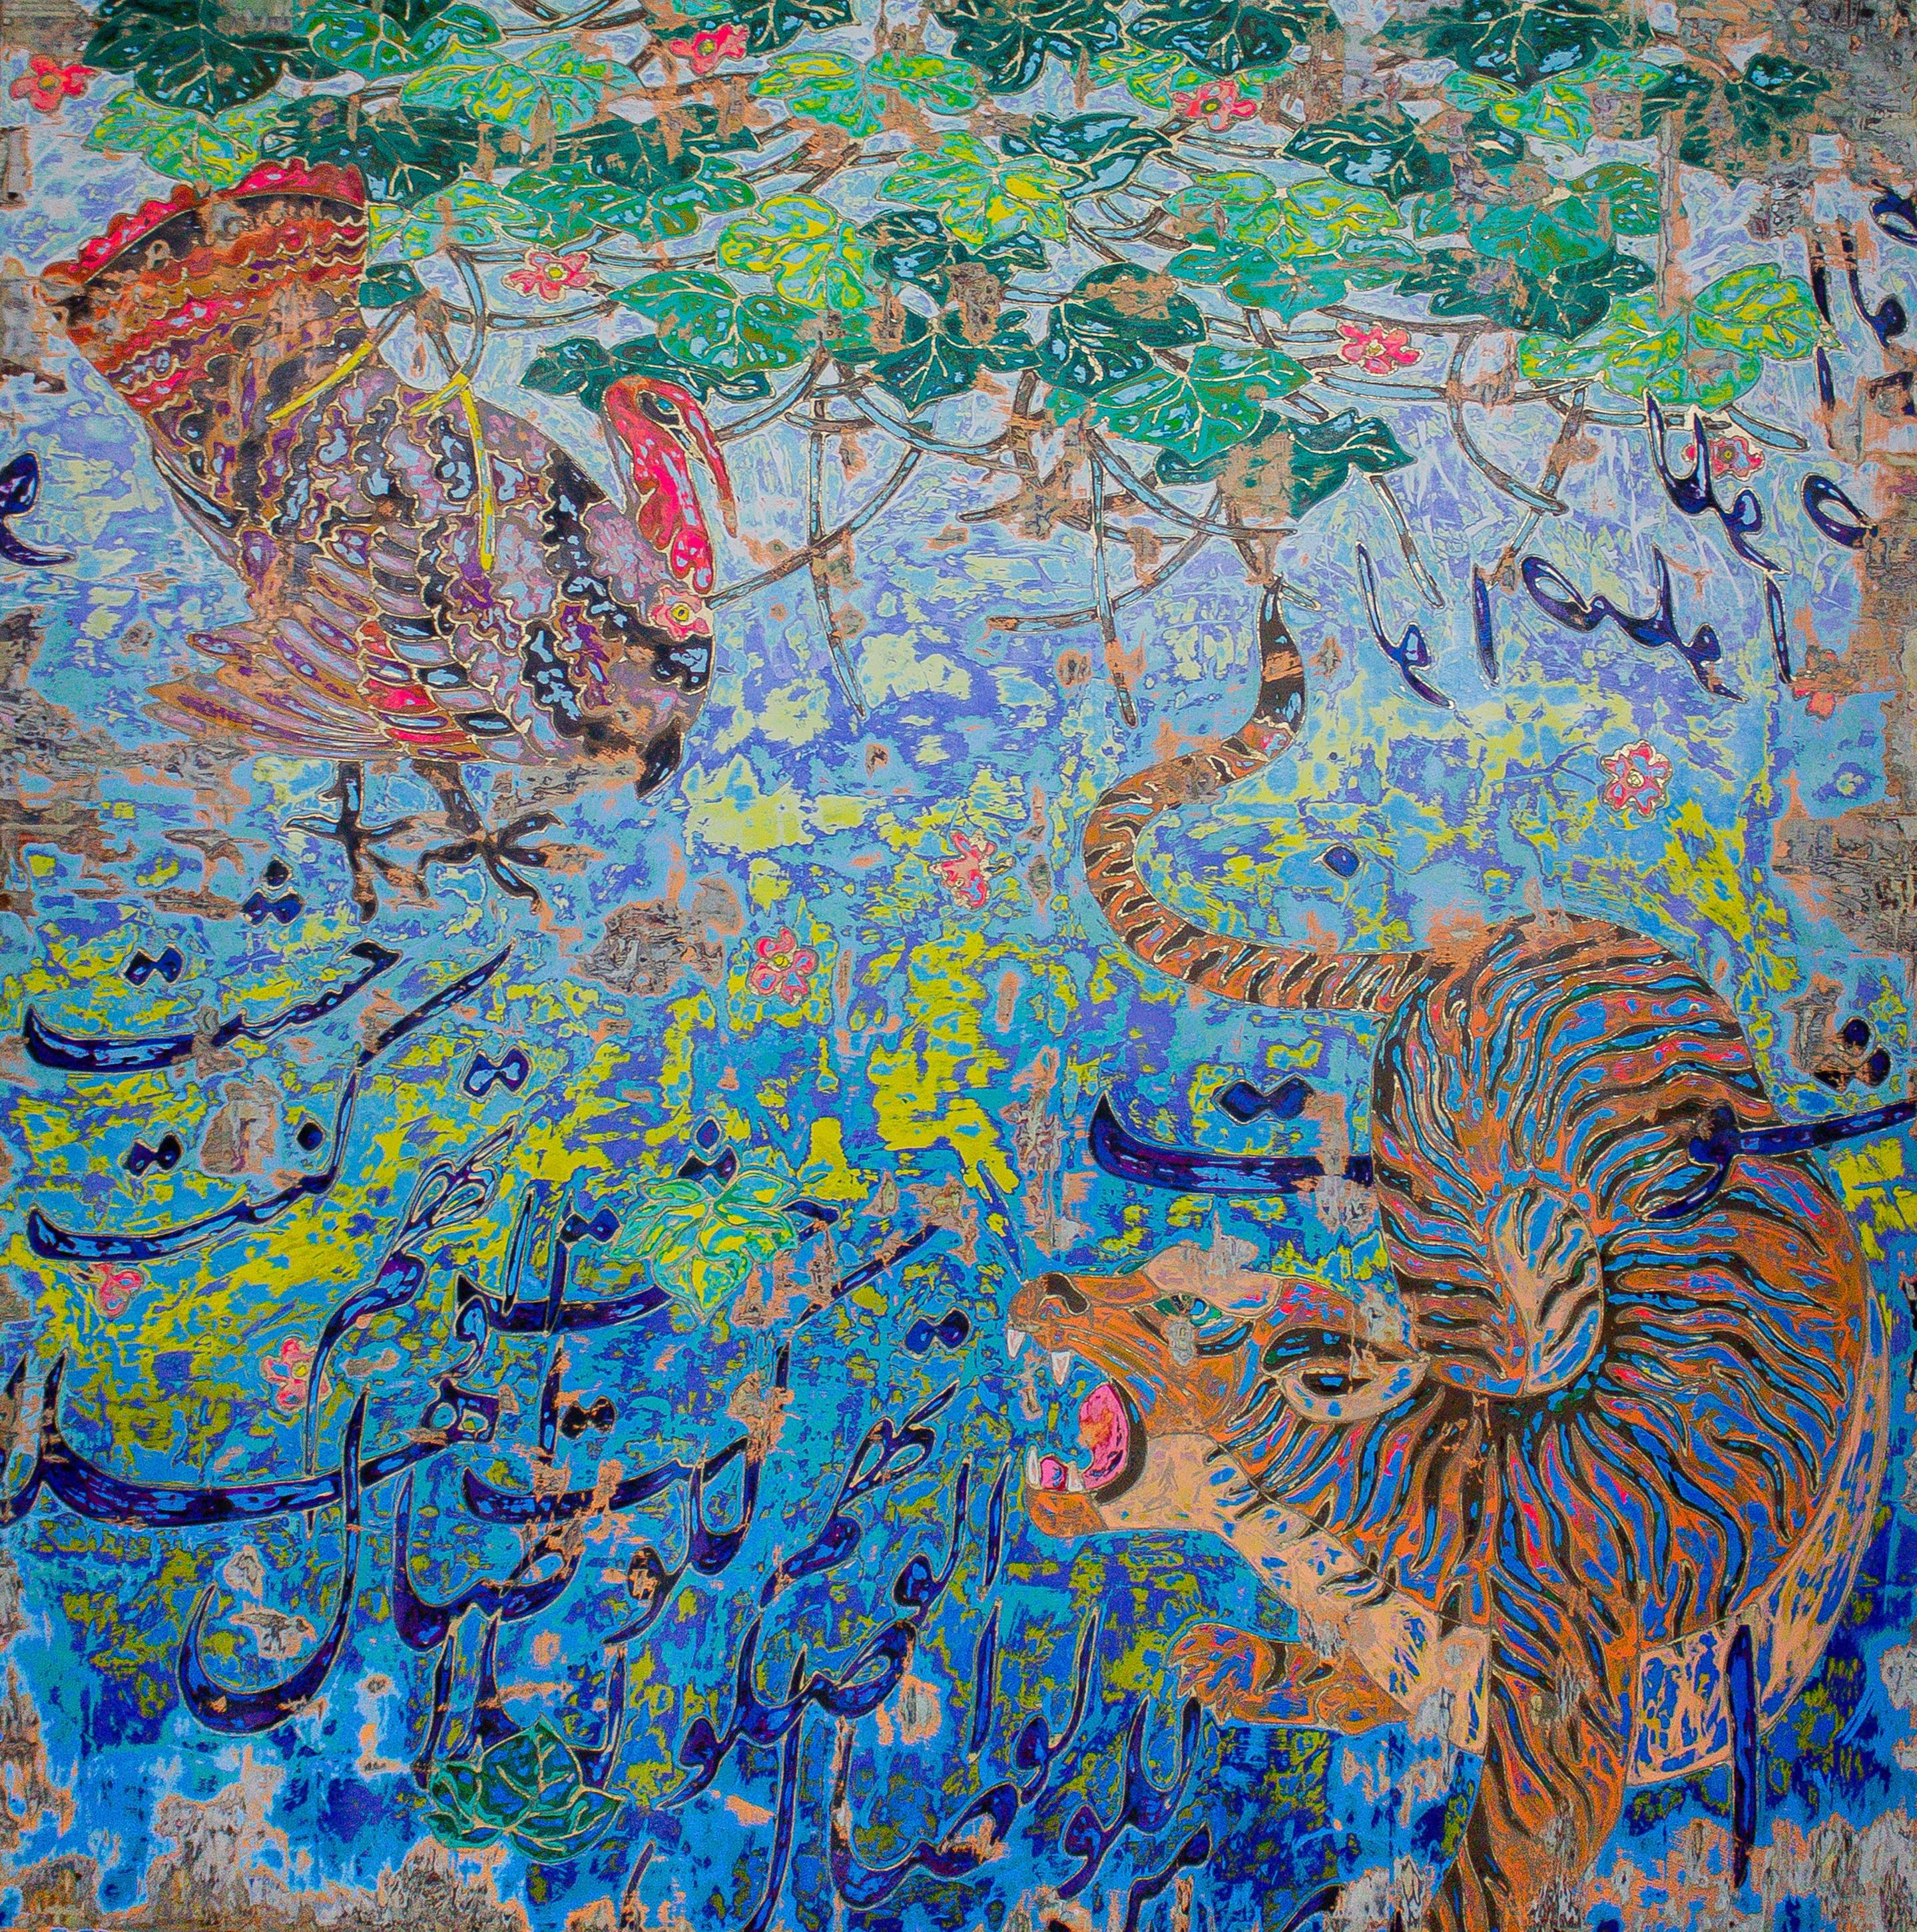 "Crouching Tiger" Painting 59" x 59" inch by Ibrahim Khatab


Ibrahim Khatab was born in Cairo 1984, works as a co-teacher in Cairo University, he mixes between painting, video art and installation in his artworks. He started since his childhood